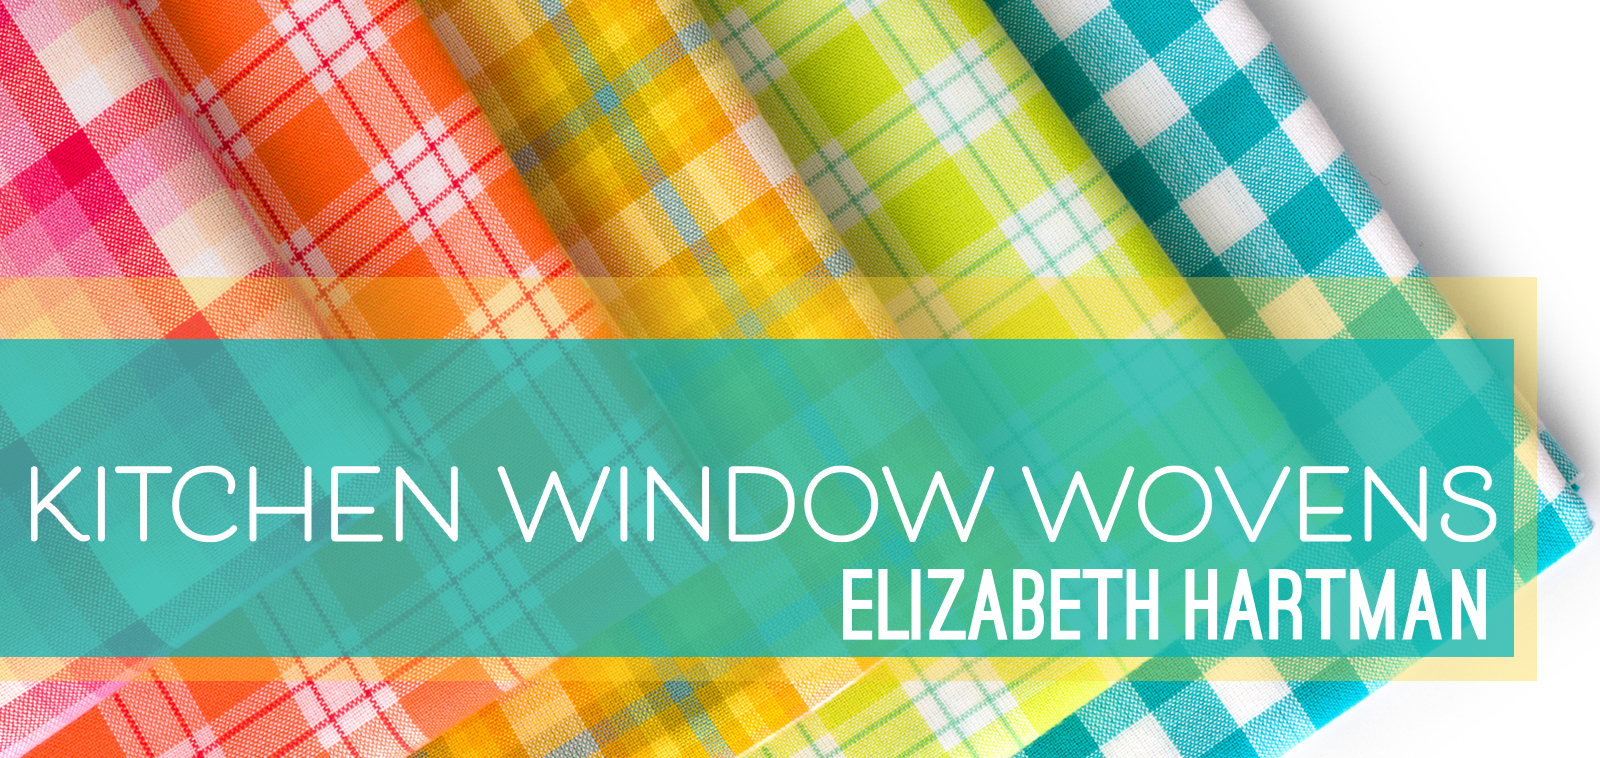 Elizabeth Hartman Day - Books, Patterns, and her new fabric line